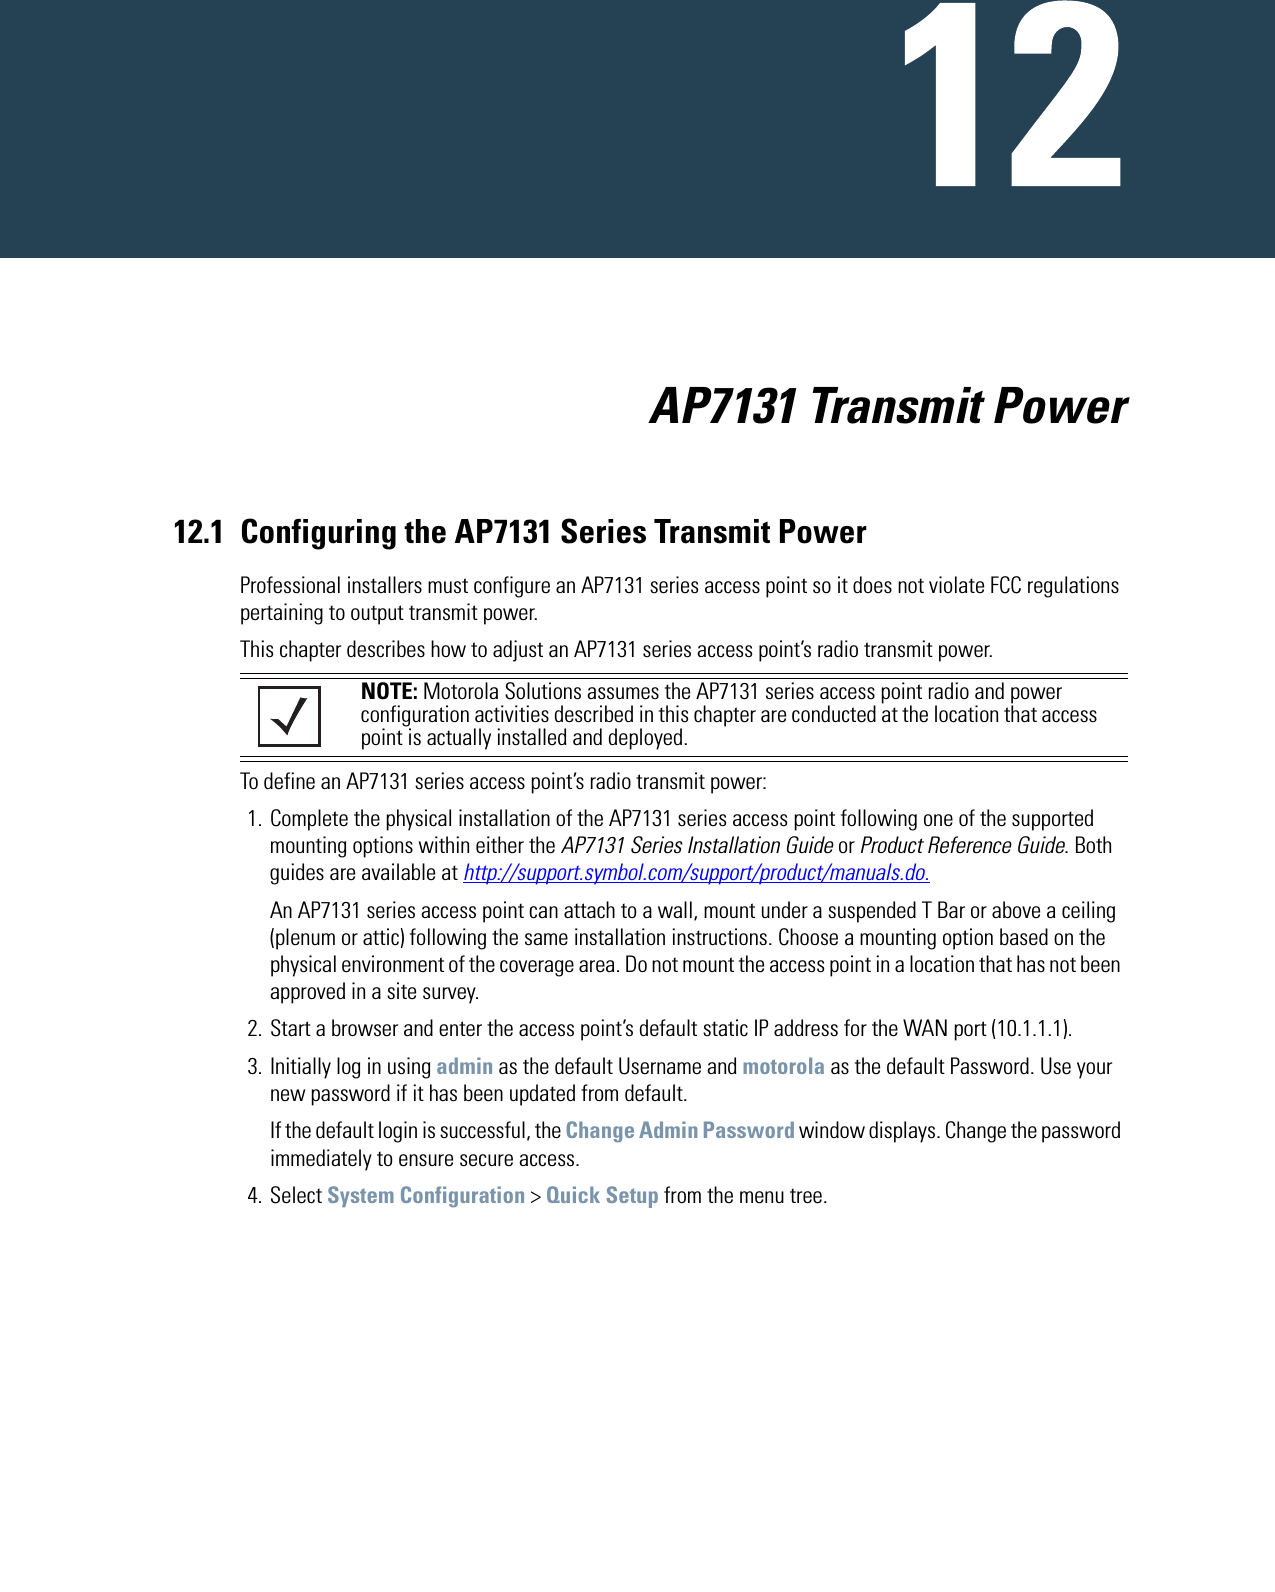                           AP7131 Transmit Power12.1 Configuring the AP7131 Series Transmit PowerProfessional installers must configure an AP7131 series access point so it does not violate FCC regulations pertaining to output transmit power.This chapter describes how to adjust an AP7131 series access point’s radio transmit power.To define an AP7131 series access point’s radio transmit power:1. Complete the physical installation of the AP7131 series access point following one of the supported mounting options within either the AP7131 Series Installation Guide or Product Reference Guide. Both guides are available at http://support.symbol.com/support/product/manuals.do.An AP7131 series access point can attach to a wall, mount under a suspended T Bar or above a ceiling (plenum or attic) following the same installation instructions. Choose a mounting option based on the physical environment of the coverage area. Do not mount the access point in a location that has not been approved in a site survey.2. Start a browser and enter the access point’s default static IP address for the WAN port (10.1.1.1).3. Initially log in using admin as the default Username and motorola as the default Password. Use your new password if it has been updated from default.If the default login is successful, the Change Admin Password window displays. Change the password immediately to ensure secure access.4. Select System Configuration &gt; Quick Setup from the menu tree.NOTE: Motorola Solutions assumes the AP7131 series access point radio and power configuration activities described in this chapter are conducted at the location that access point is actually installed and deployed. 